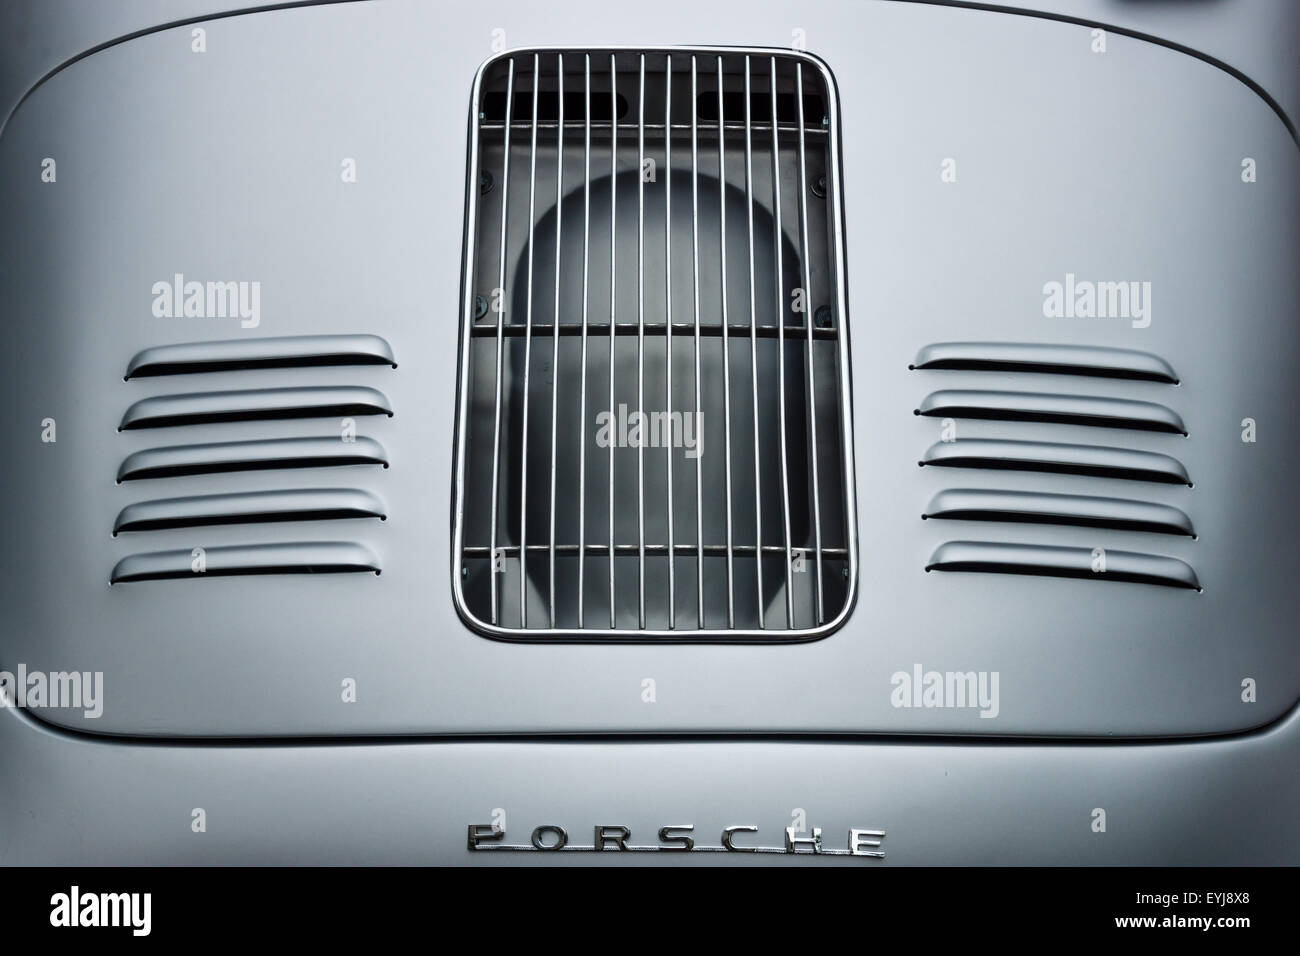 Air vents of the engine compartment of a sports car Porsche 356 Speedster. The Classic Days on Kurfuerstendamm. Stock Photo